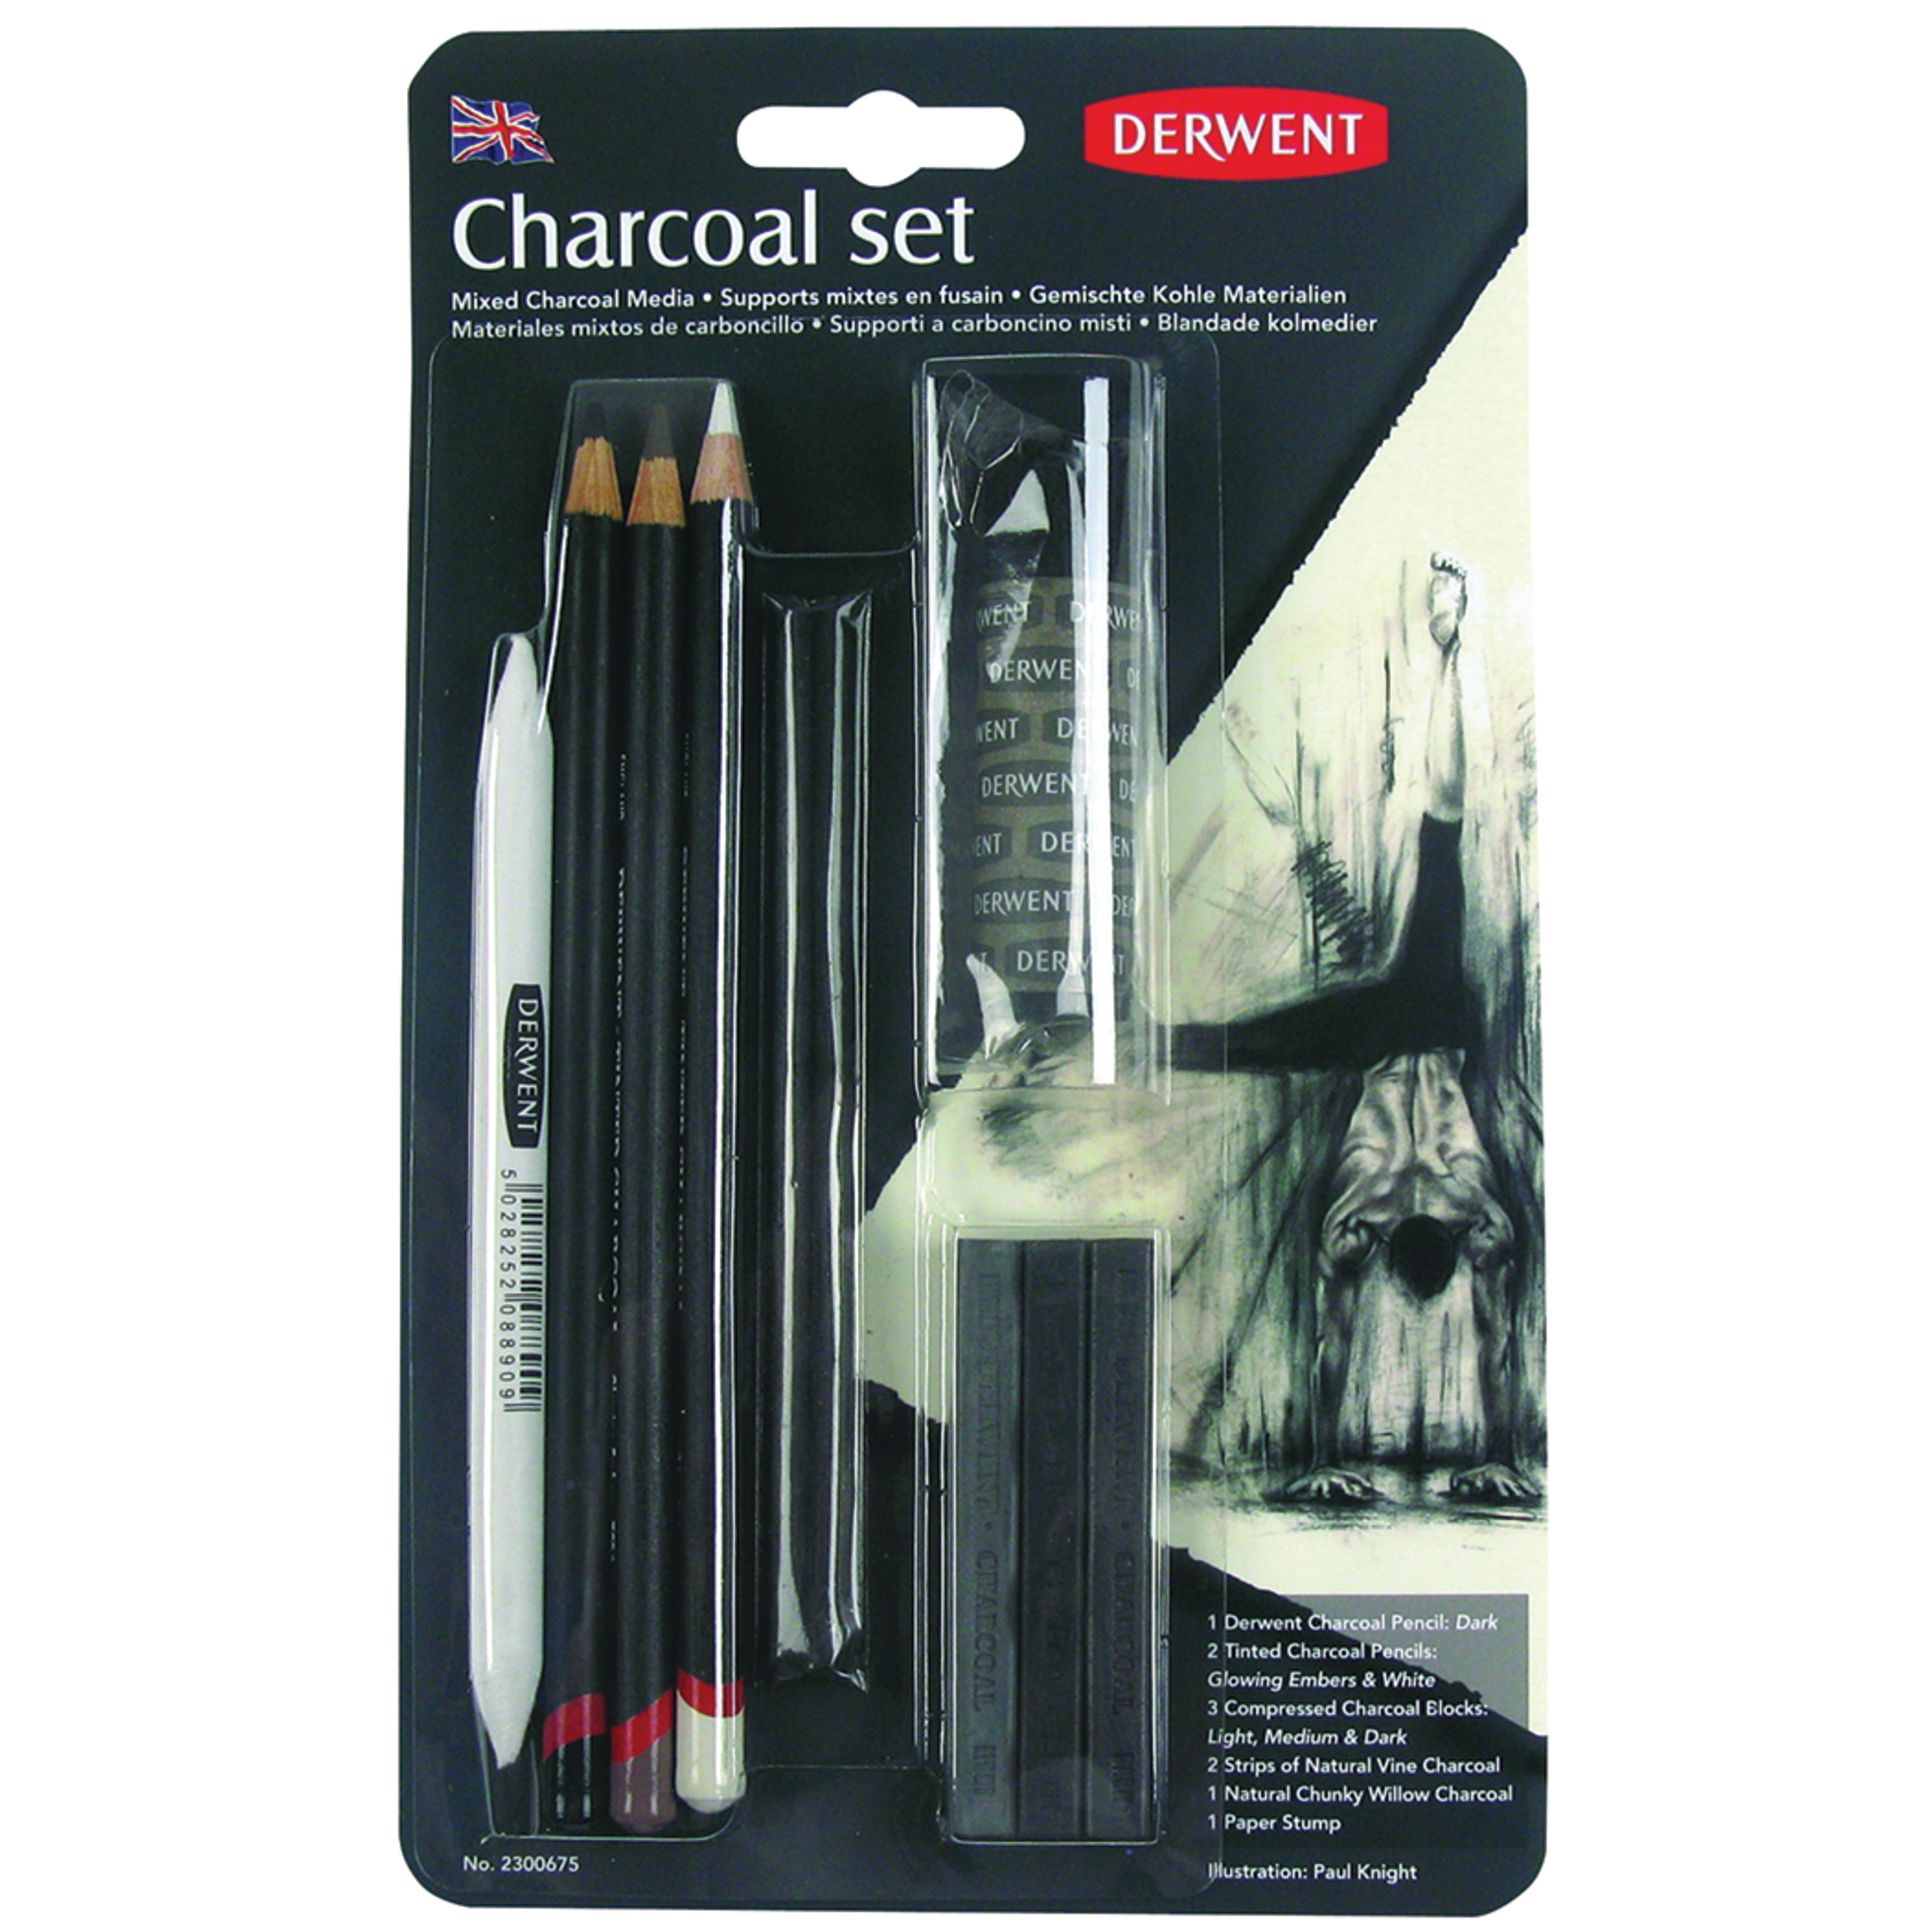 U.S. Art Supply 54-Piece Drawing & Sketching Art Set with 4 Sketch Pads  (242 Paper Sheets) - Ultimate Artist Kit, Graphite and Charcoal Pencils &  Sticks, Pastels, Erasers - Pop-Up Carry Case